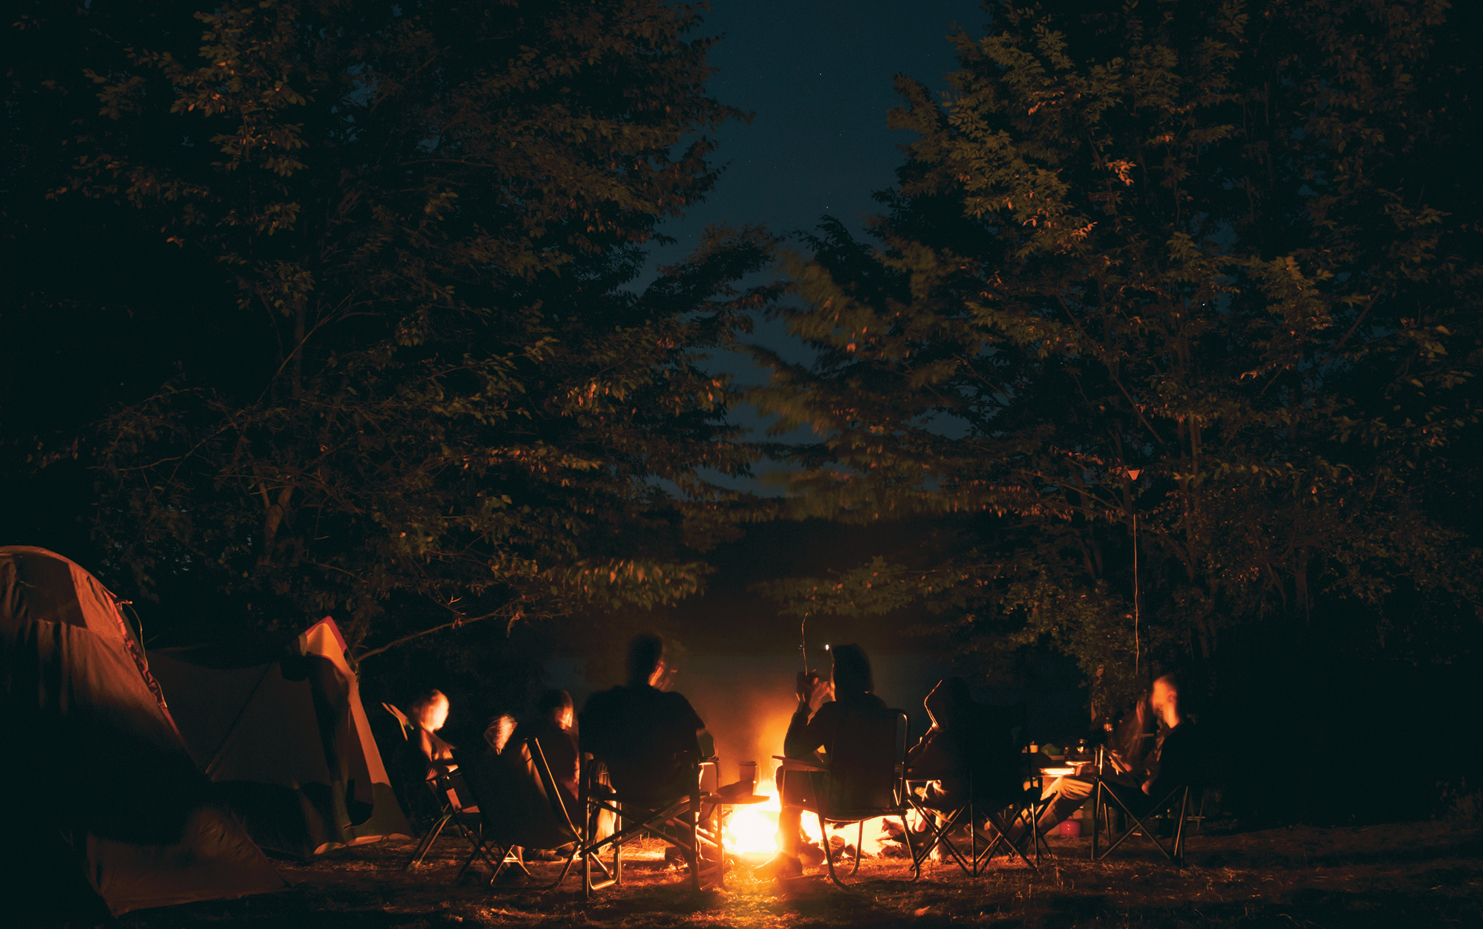 A group of people sitting around the fire at night.